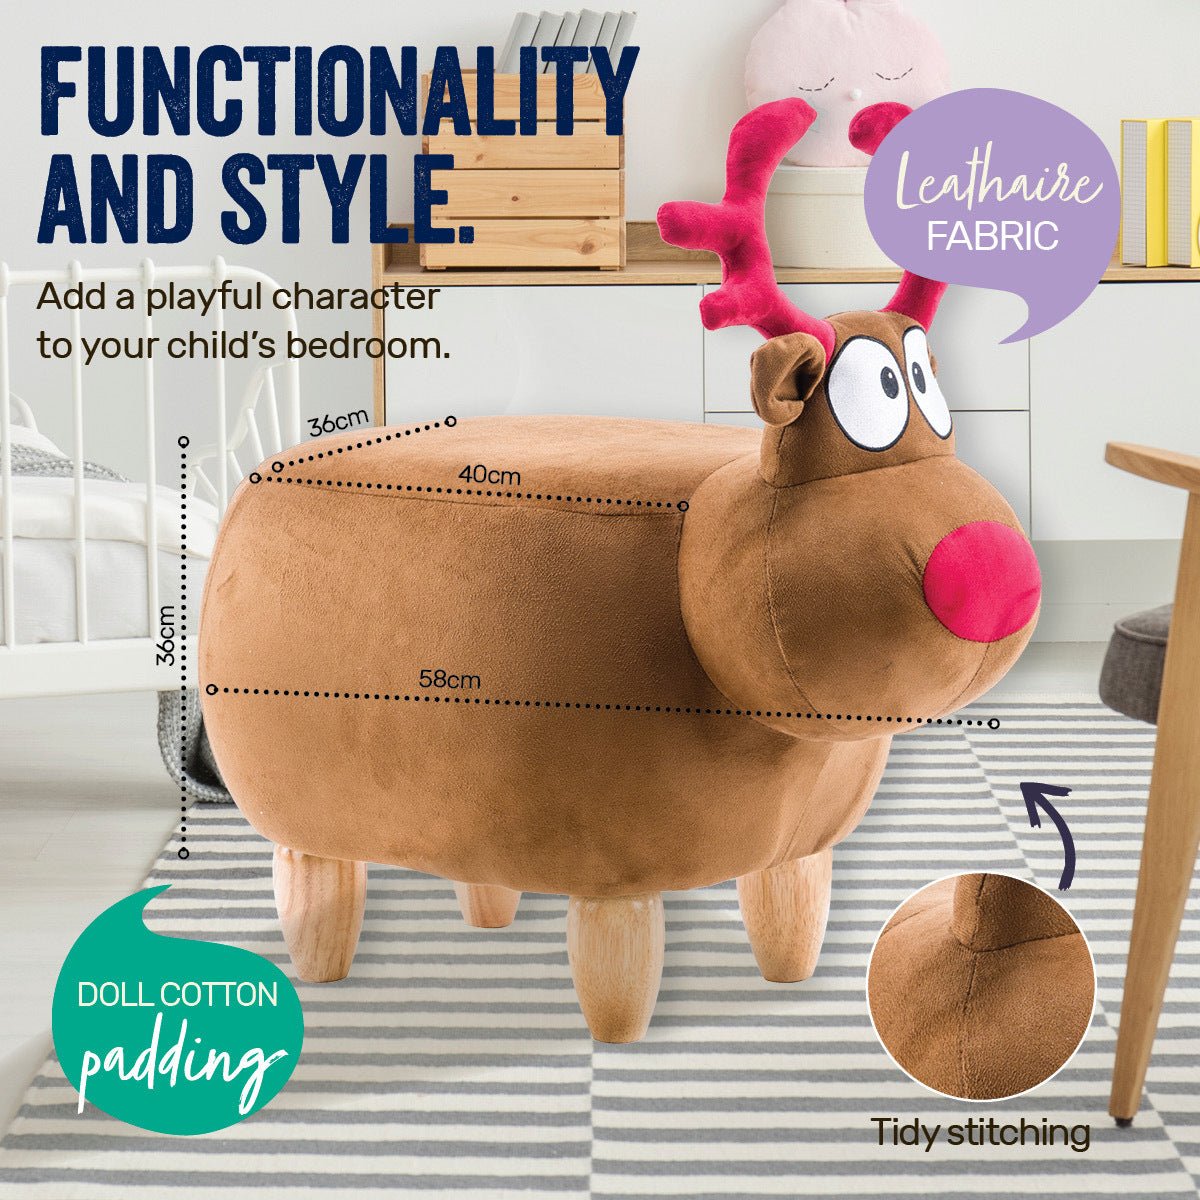 Home Master Kids Animal Stool Reindeer Character Premium Quality &amp; Style - Little Kids Business